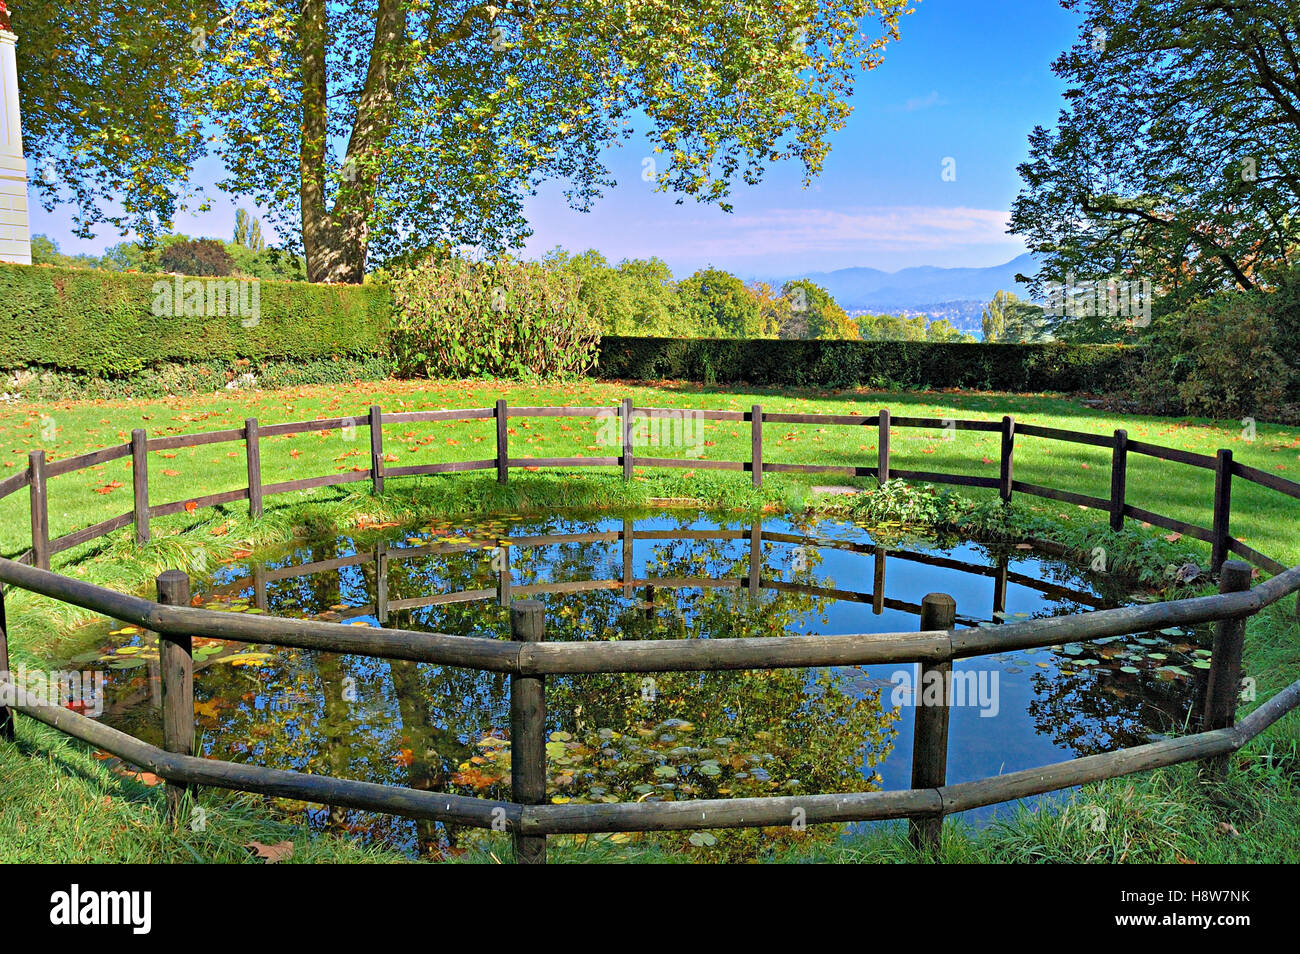 Pond circled by old wooden fence in a garden with mountains in the distant background. Stock Photo